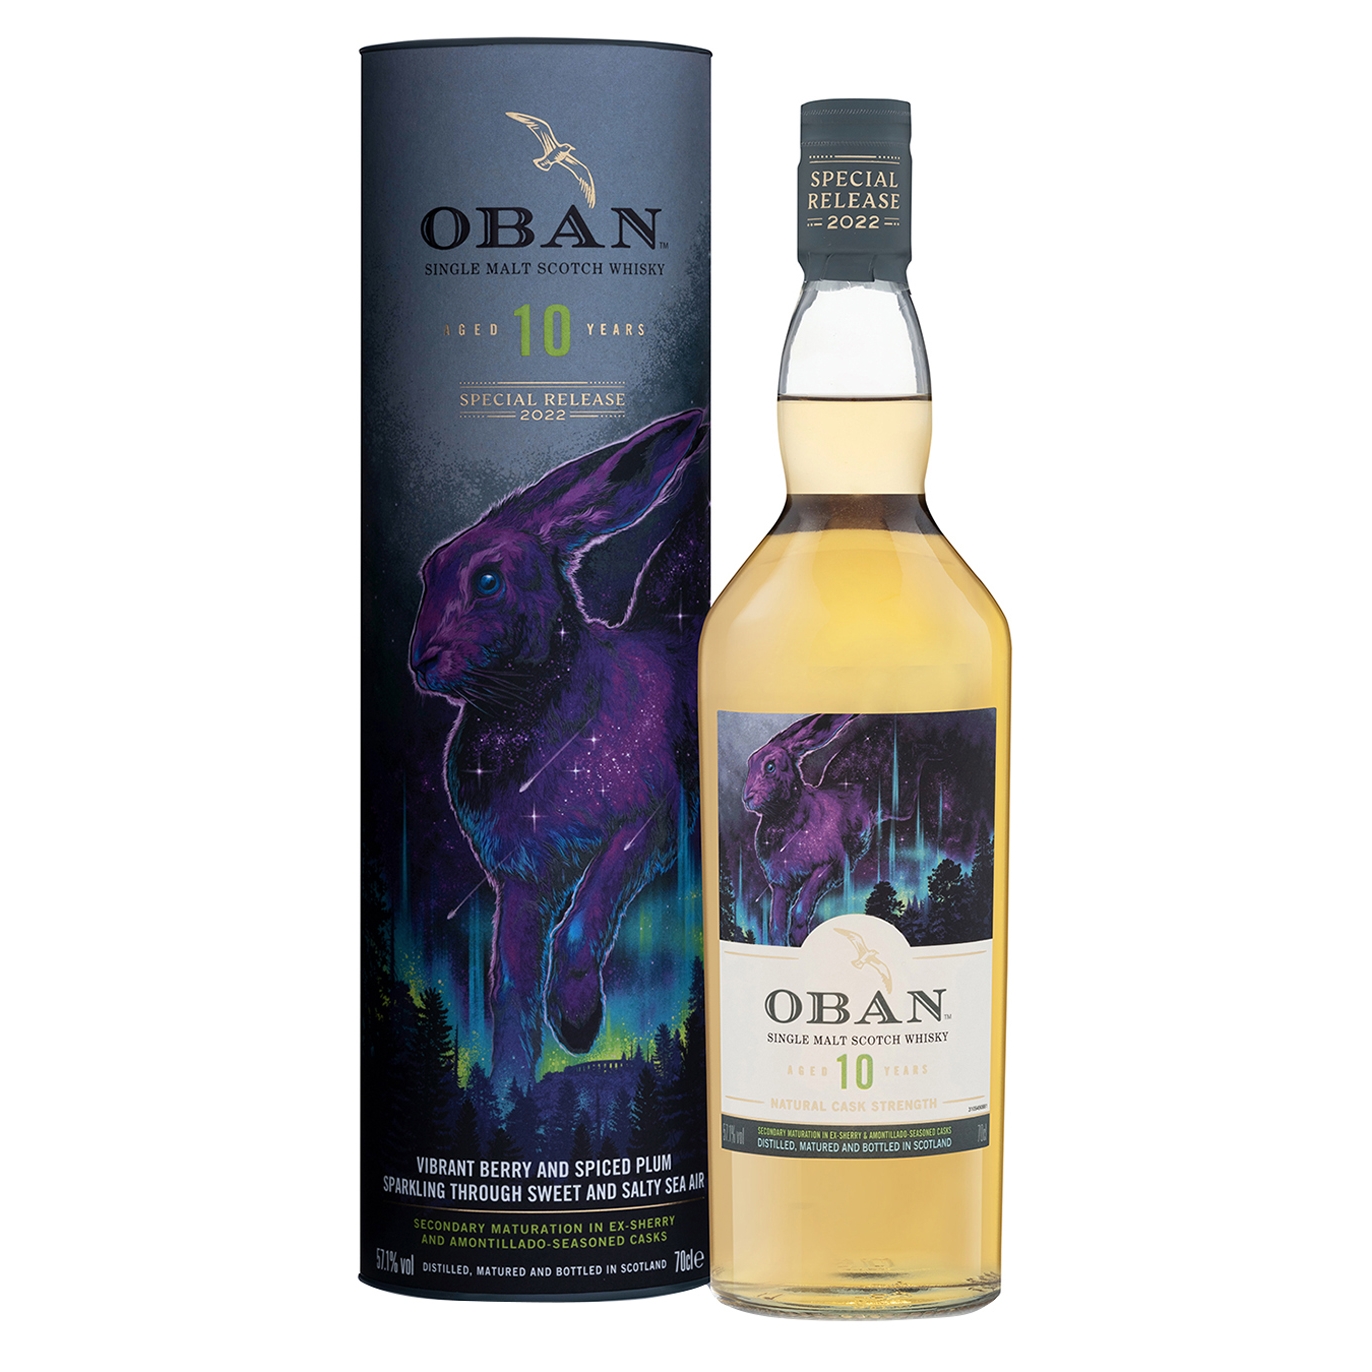 Oban 10 Year Old Single Malt Scotch Whisky Special Release 2022